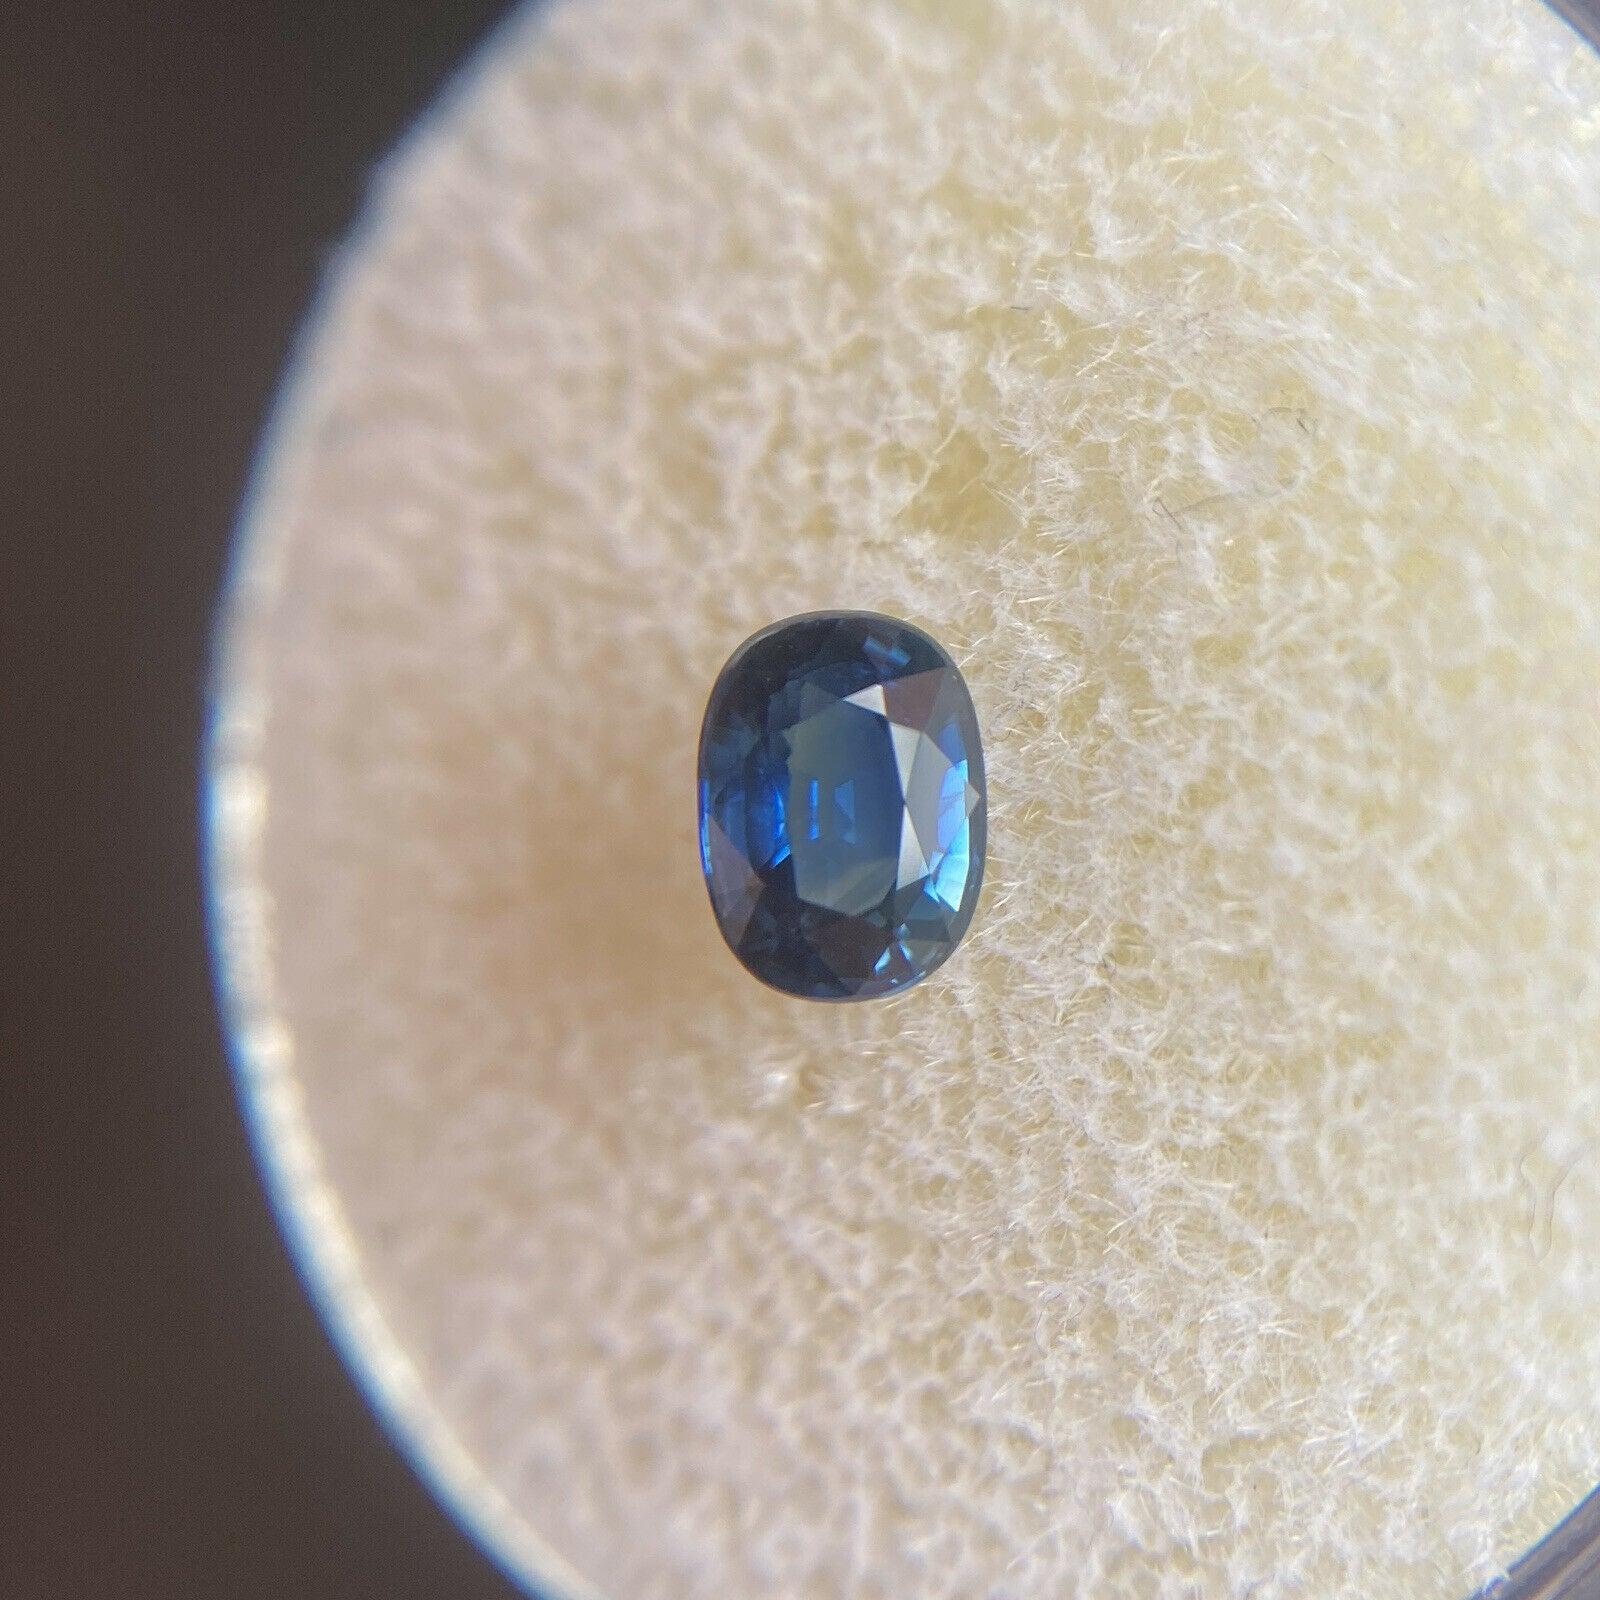 Natural Australian Deep Blue Sapphire 0.67ct Oval Cut Loose Gem 5.6 x 4.2mm

Natural Australian Blue Sapphire Gemstone. 
0.67 Carat with a deep blue colour and very good clarity. Only some small natural inclusions visible when looking closely. Also